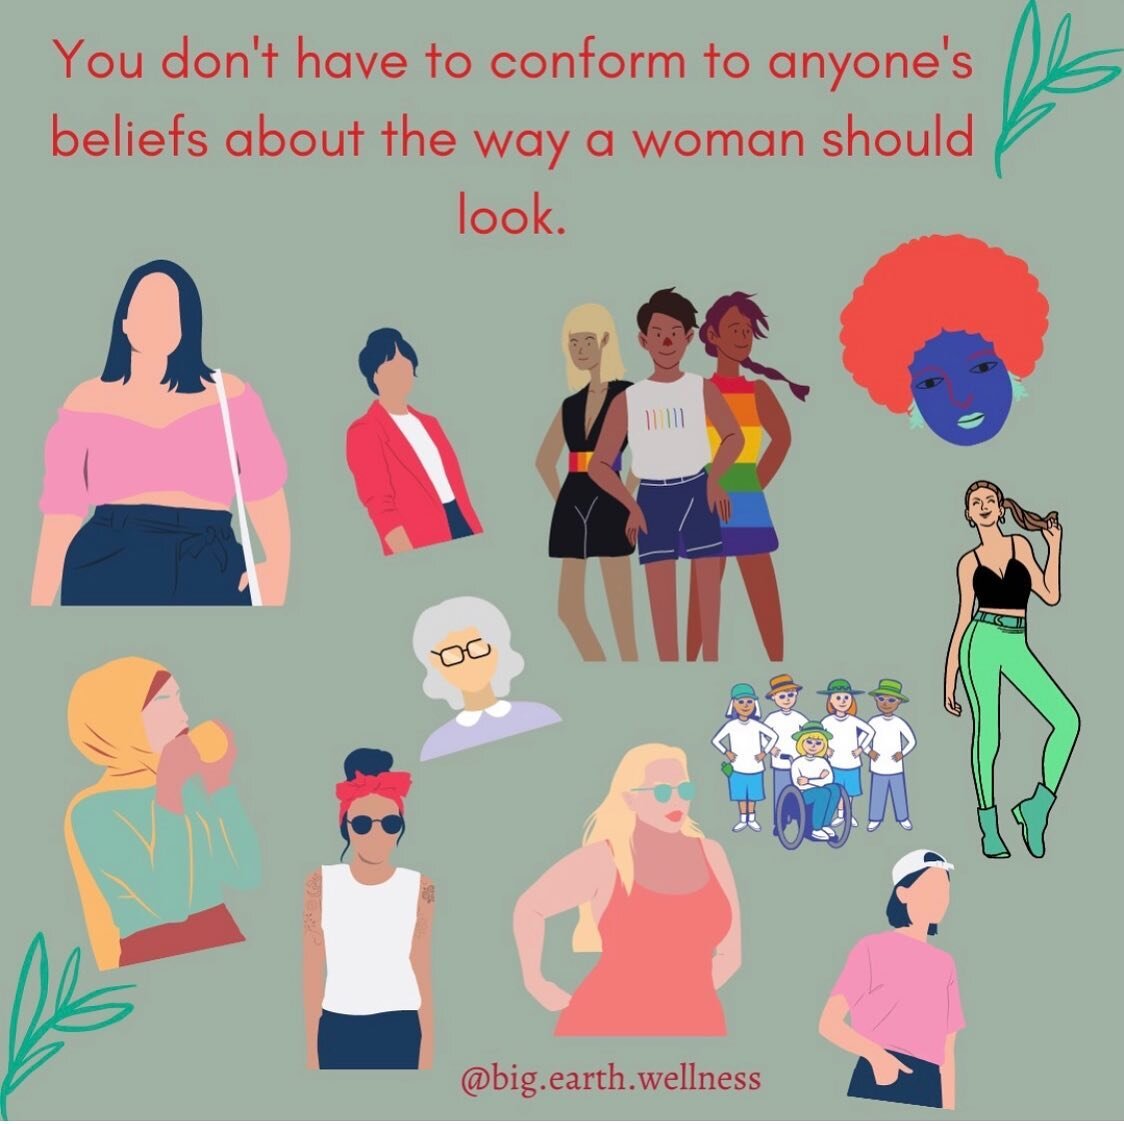 Individuals who identify as women are often expected to look and act a certain way. They are repeatedly made to feel undervalued because they don&rsquo;t fit into the box that society has created for them. You don&rsquo;t have to conform. You&rsquo;r